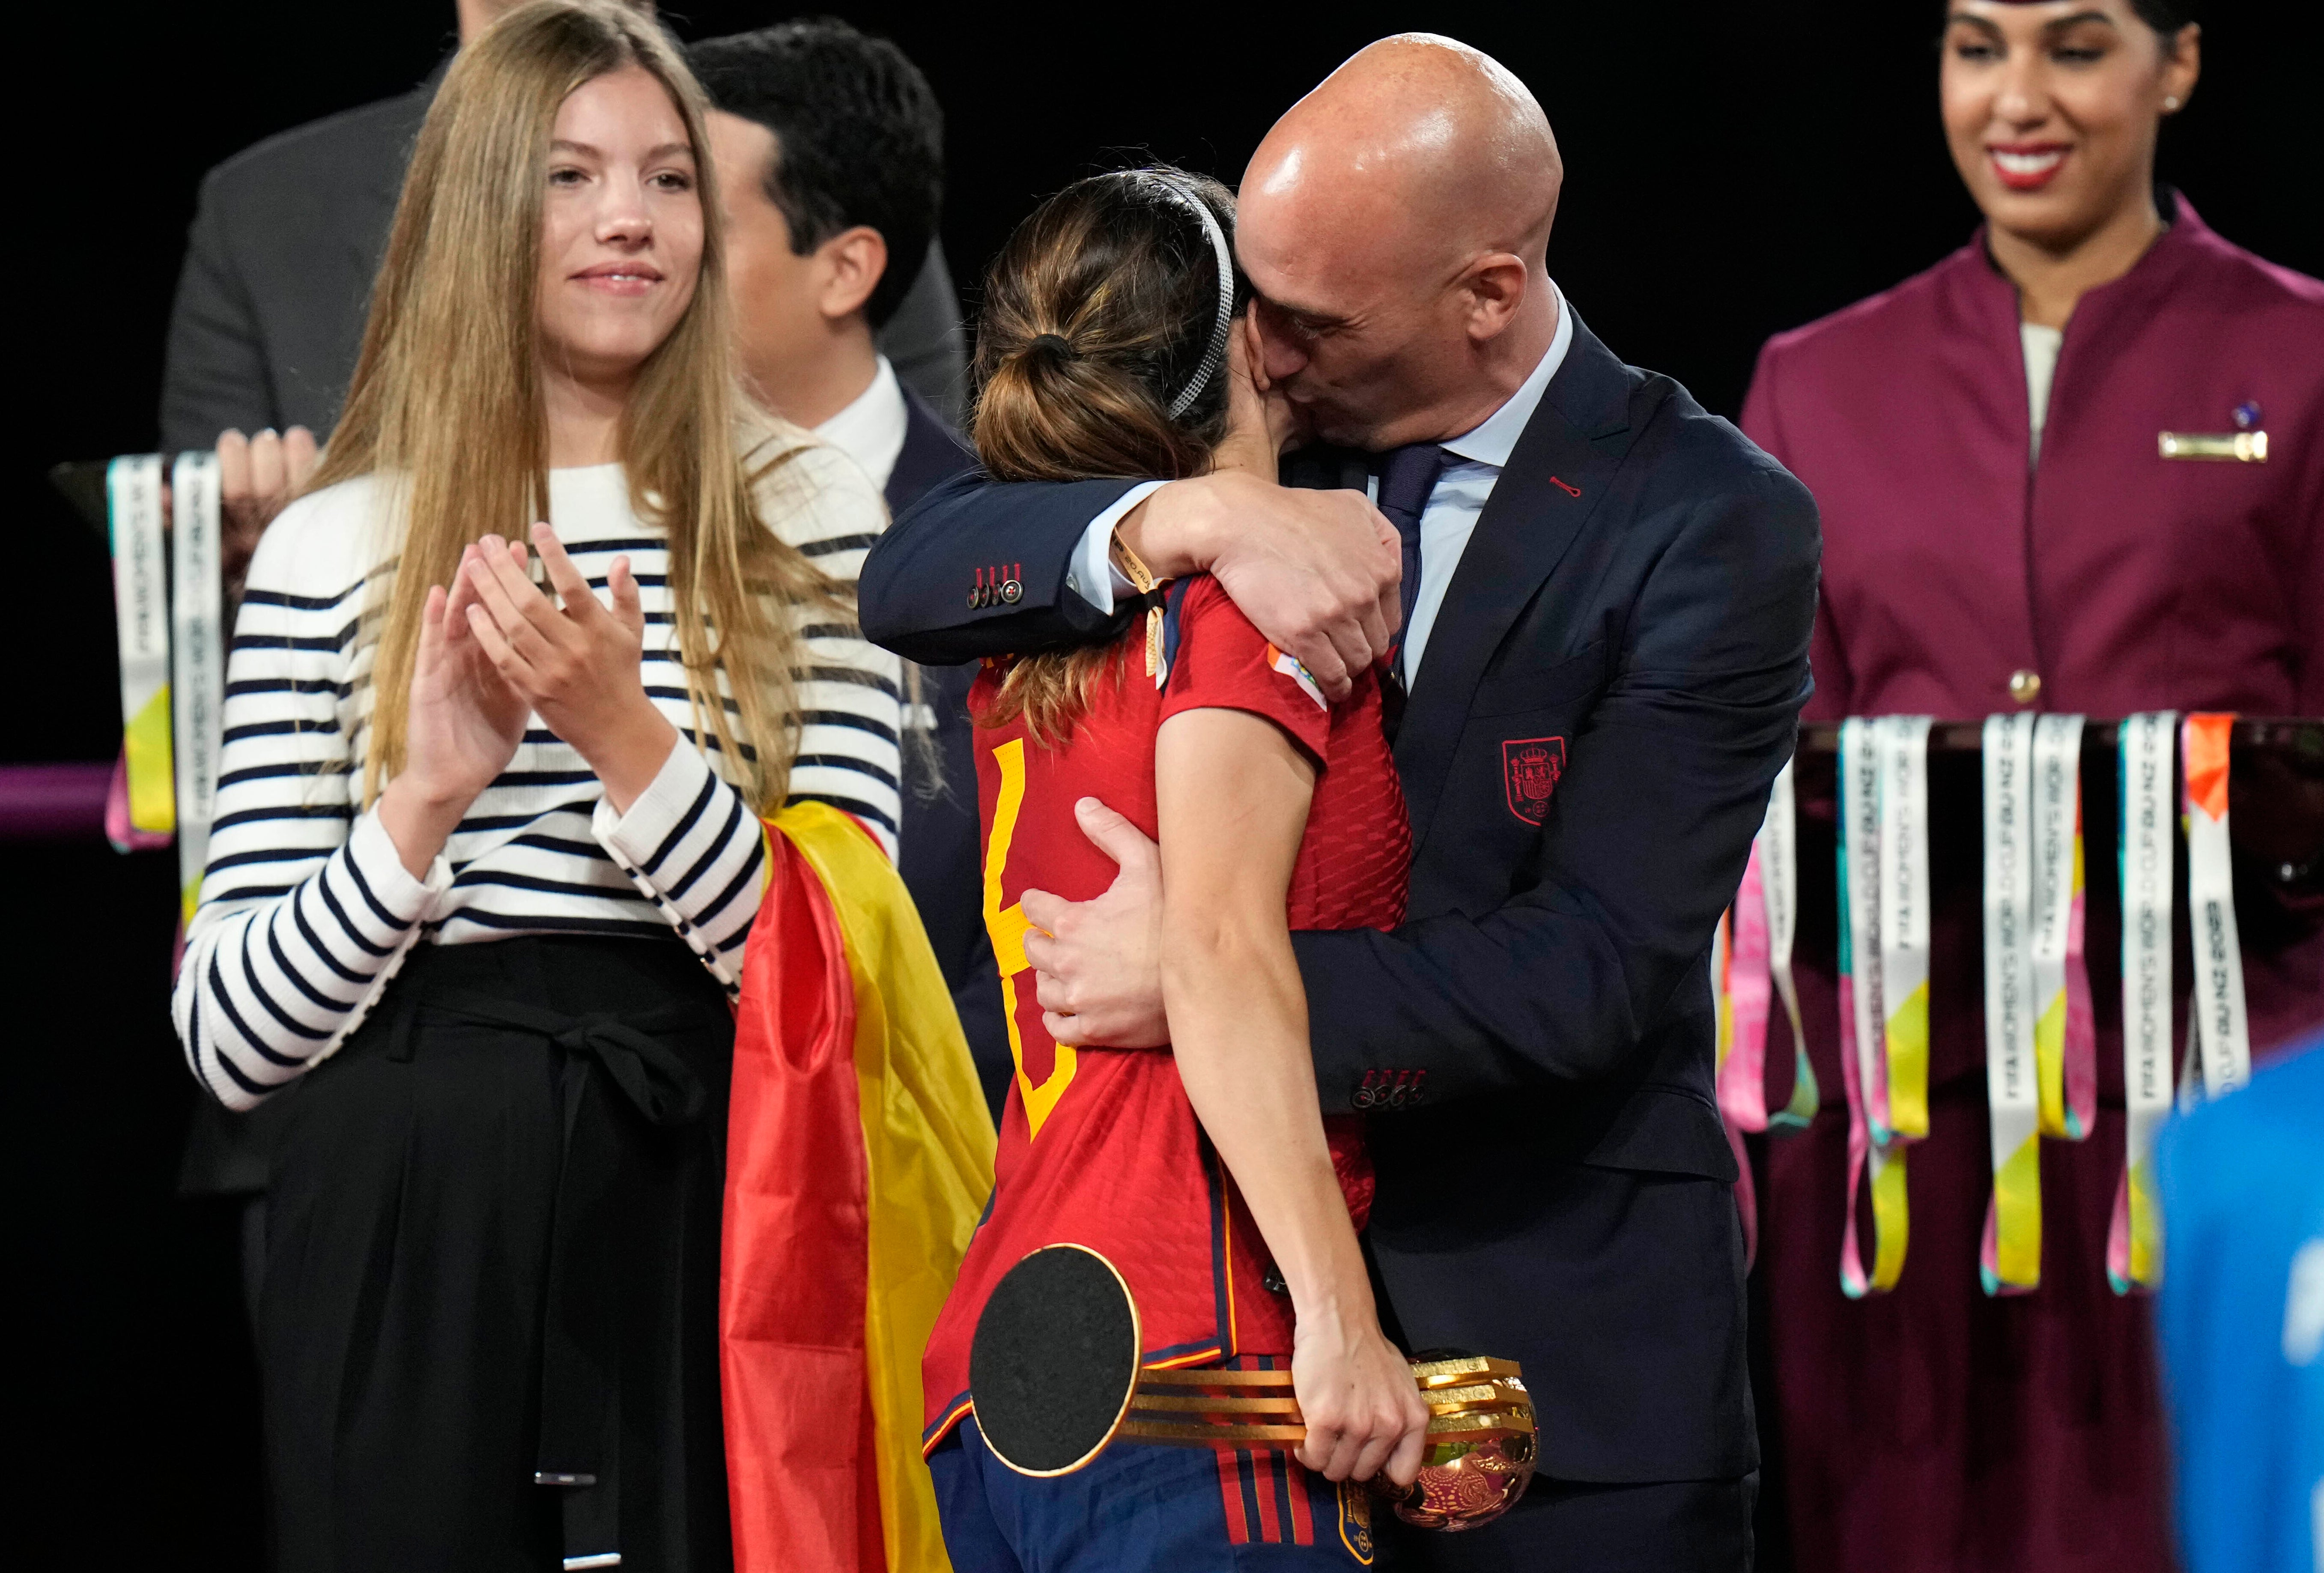 Spanish football official Luis Rubiales kissed World Cup winner Jennifer Hermoso without her consent